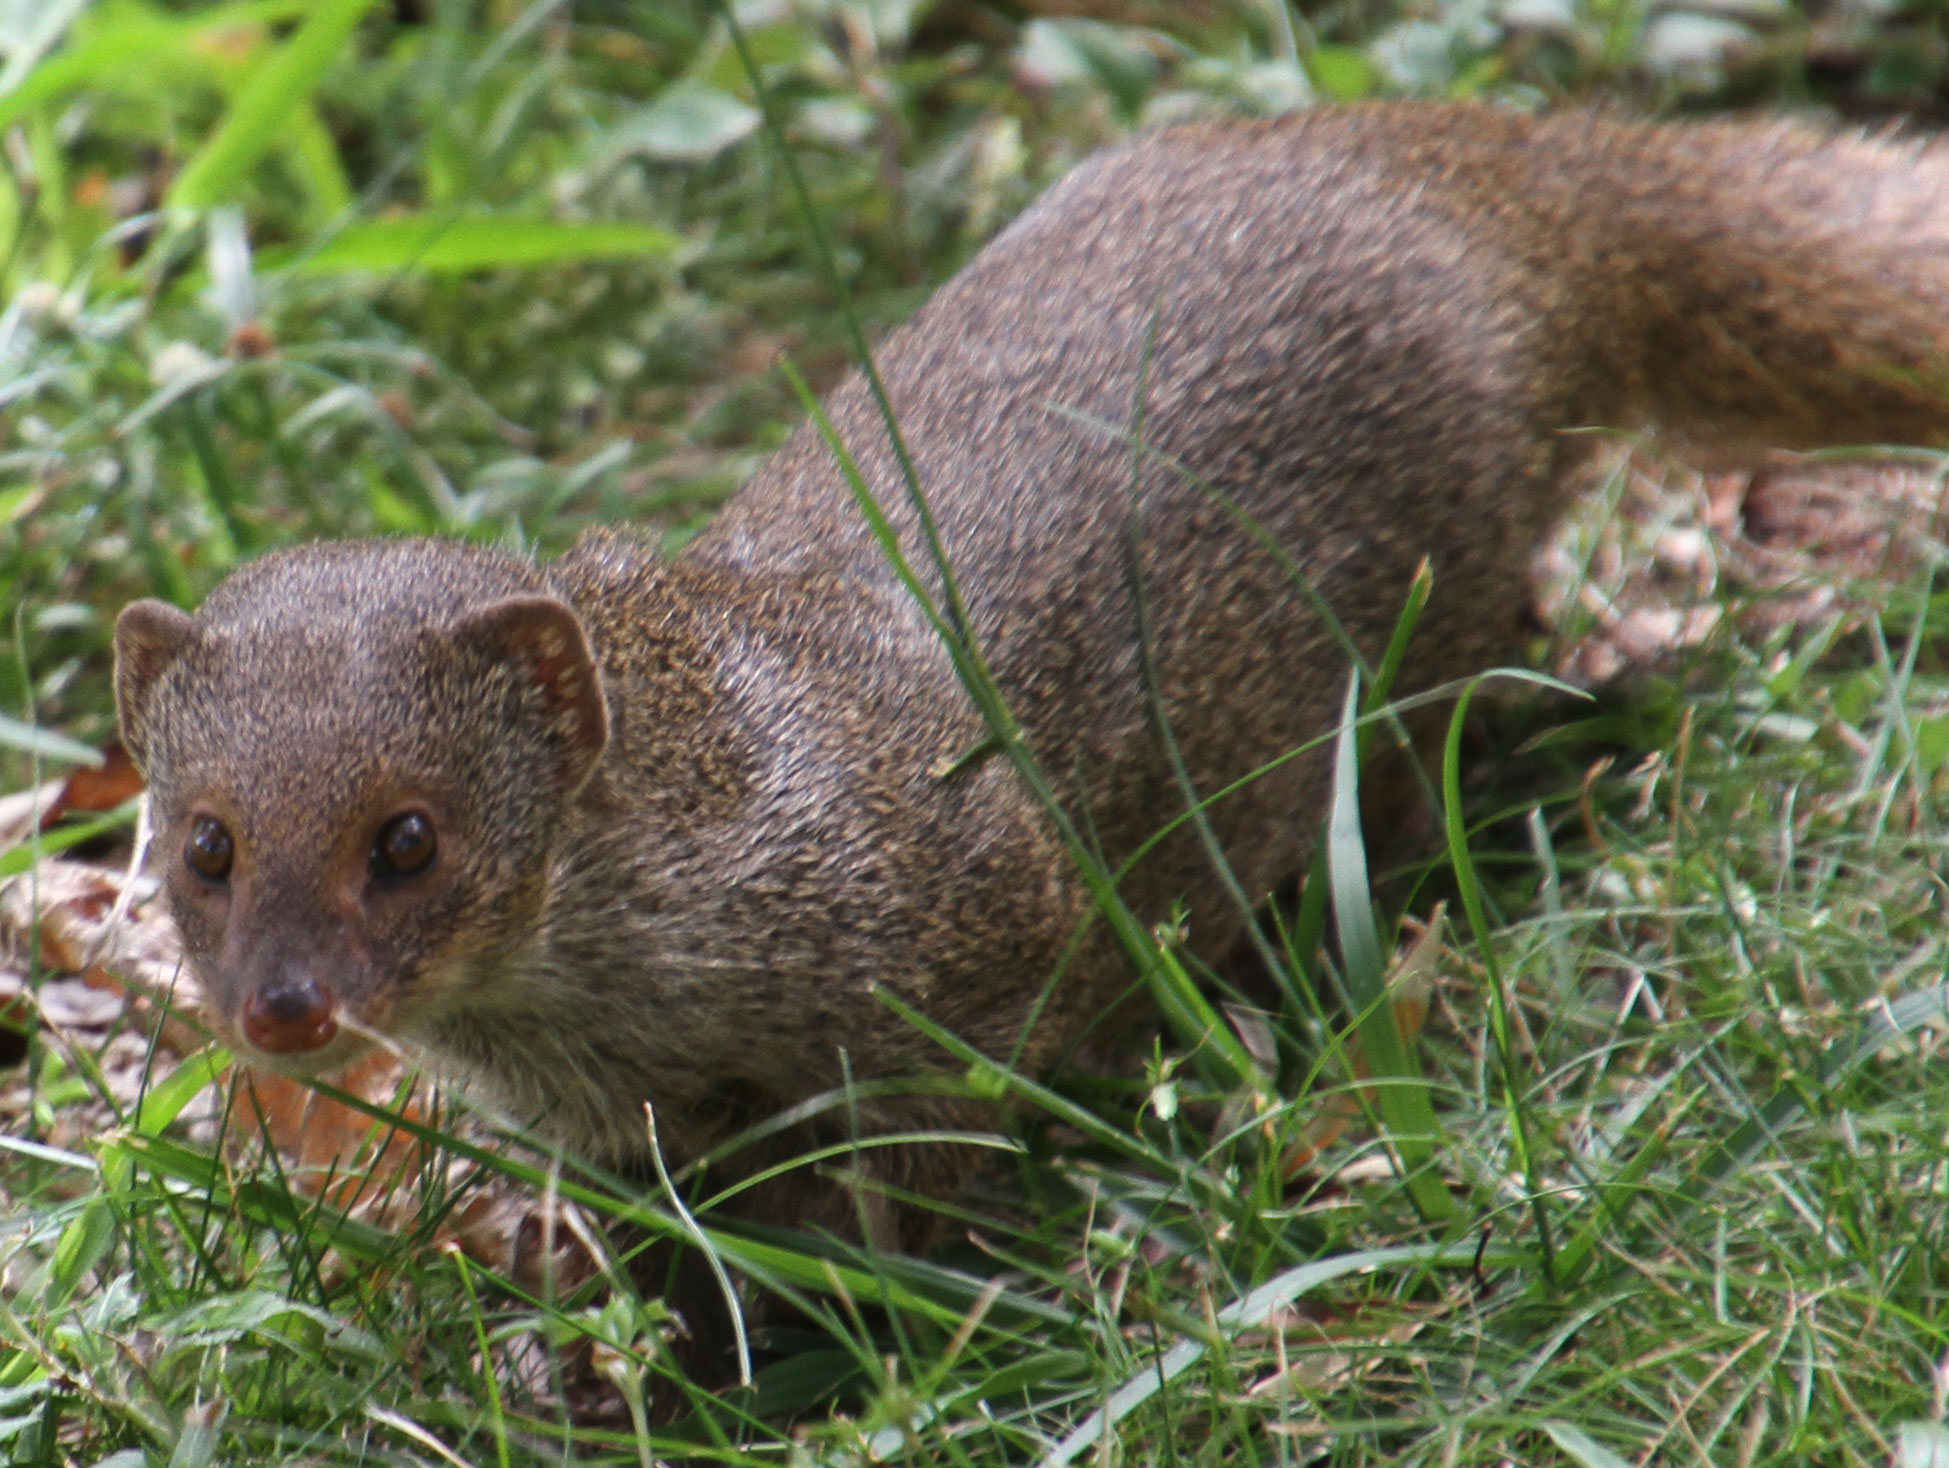 Photograph of a mongoose on O'ahu. The moongoose is brown with brown eyes and a brown nose. It has a long body, short legs, a long, bushy tail, and short, rounded ears. 